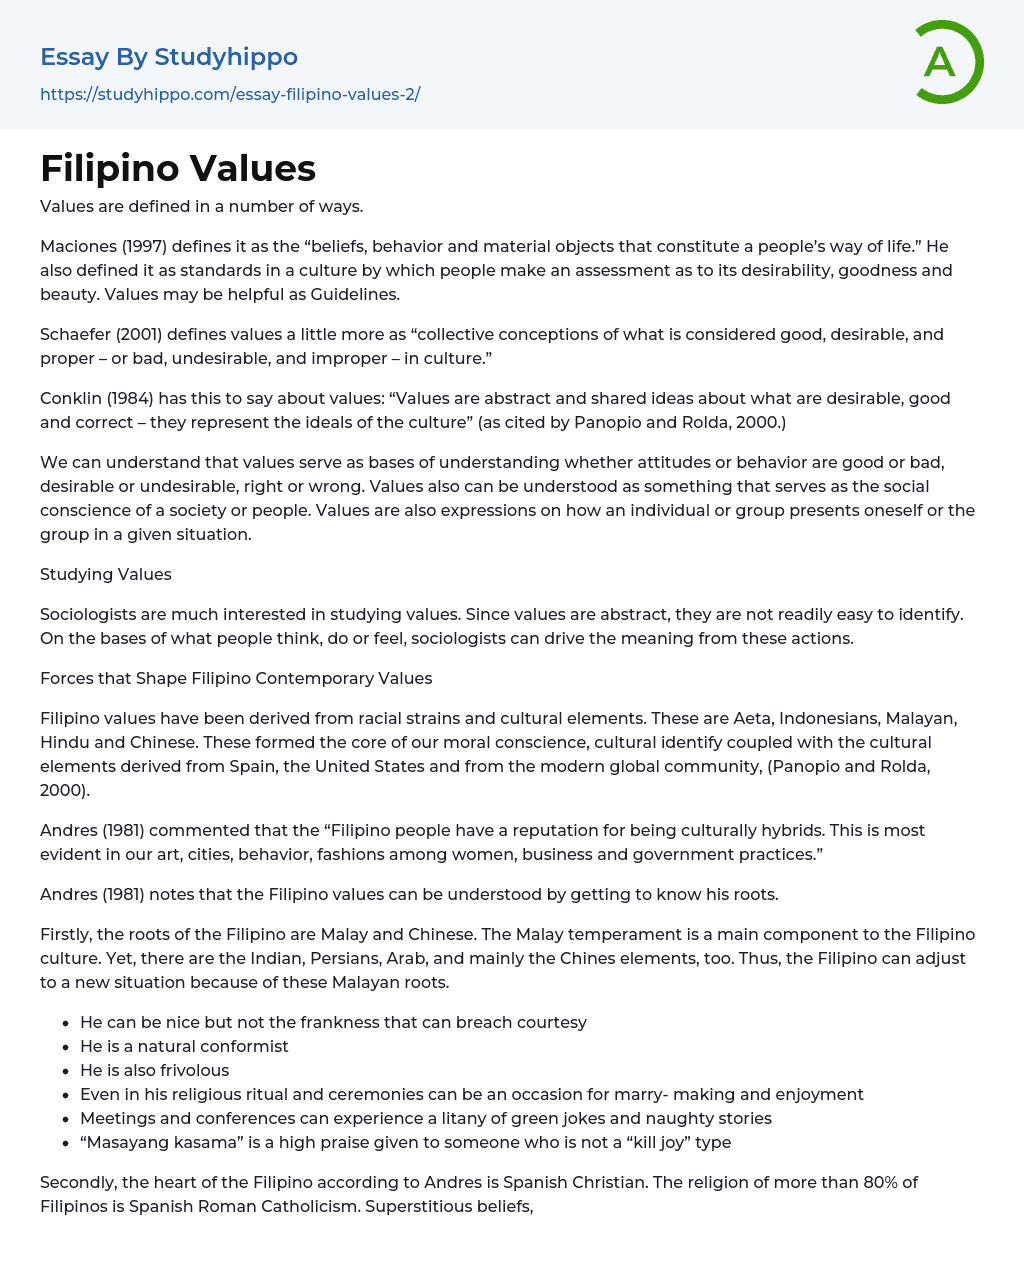 essay about filipino values and traditions brainly